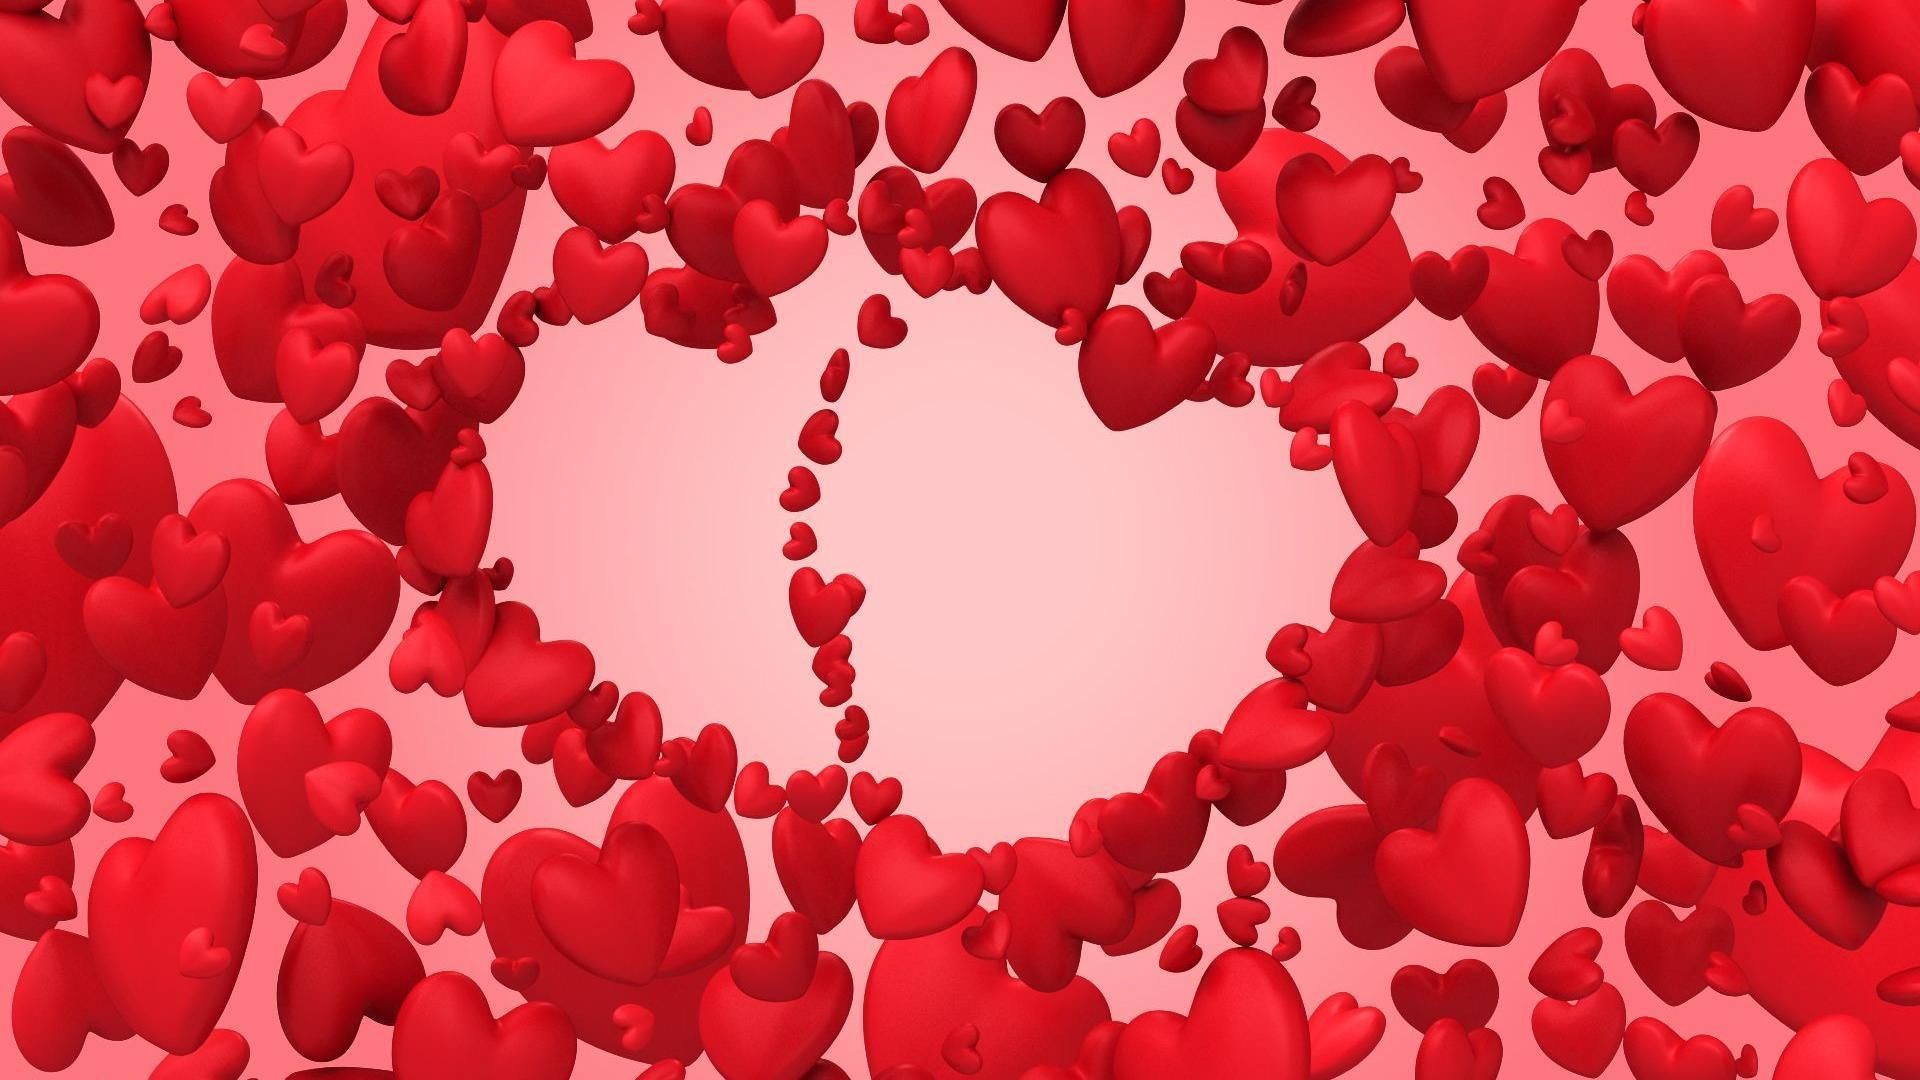 1920x1080 Love Pics Images Of Hearts And Kisses. Day Heart Wallpapers HD Wallpaper  Valentine Day Heart Wallpapers